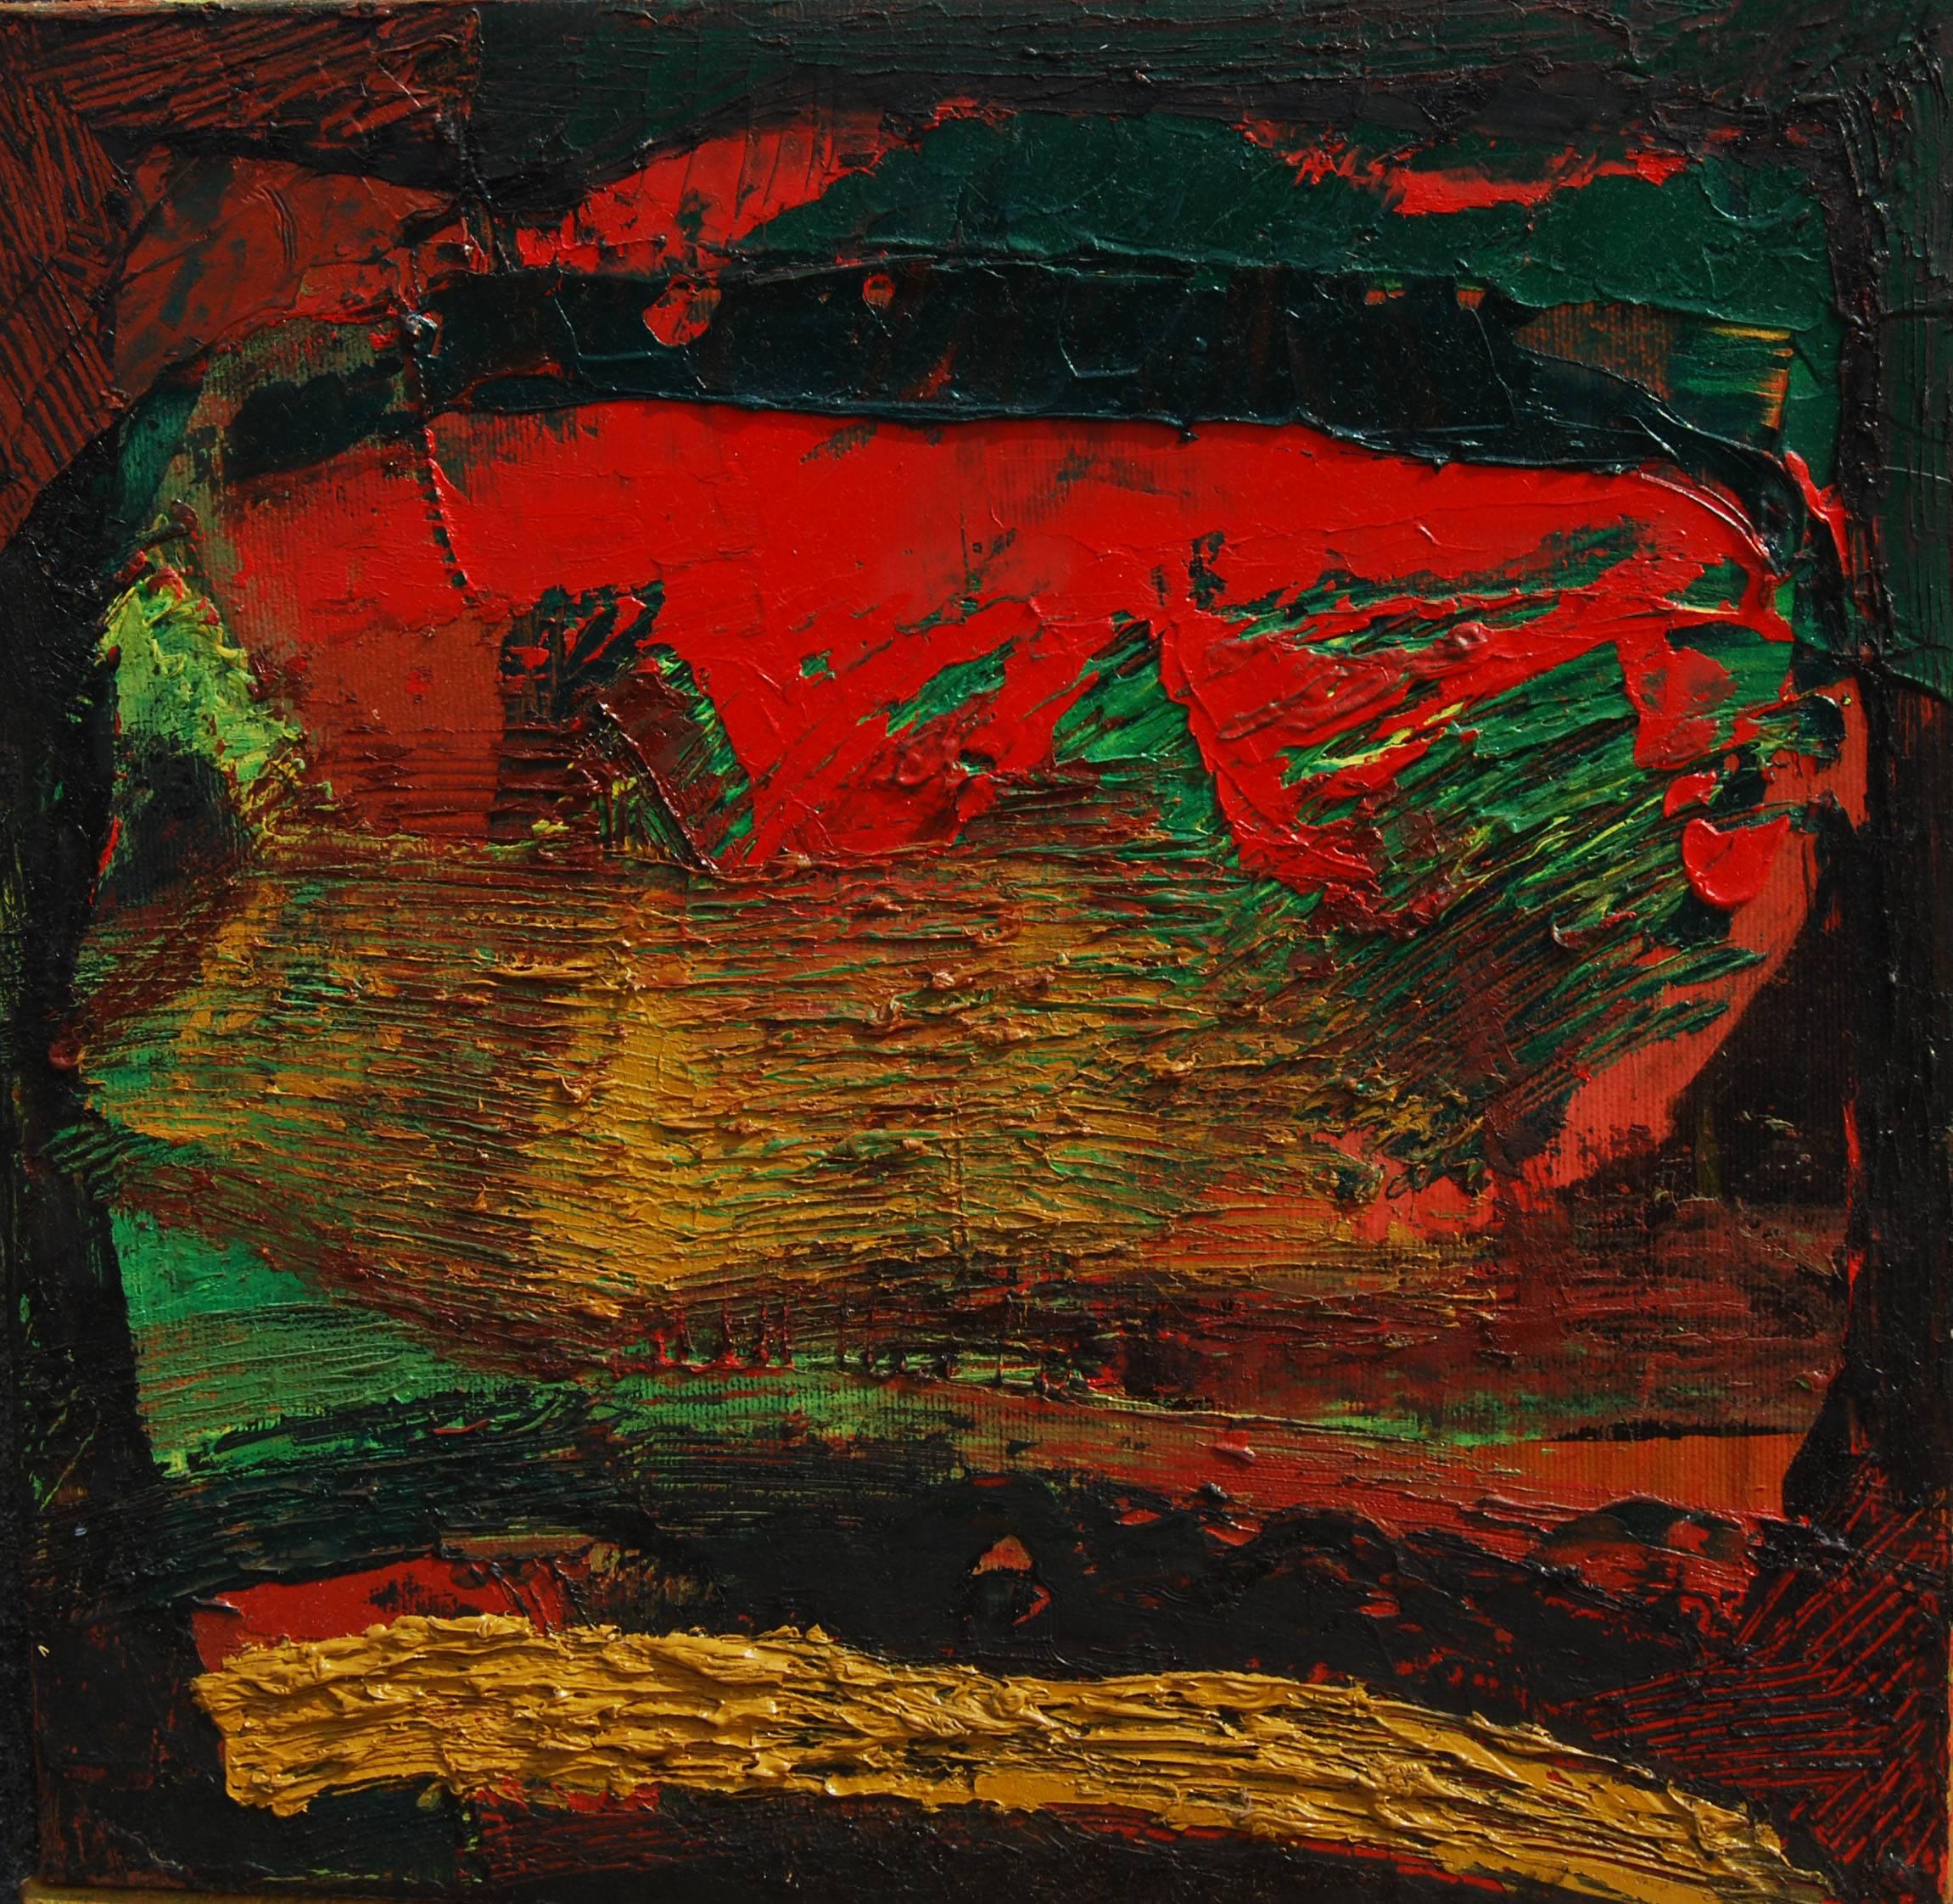 Tapas Ghosal Abstract Painting - Abstract, Acrylic & Oil on Canvas, Red, Green, Brown by Indian Artist "In Stock"